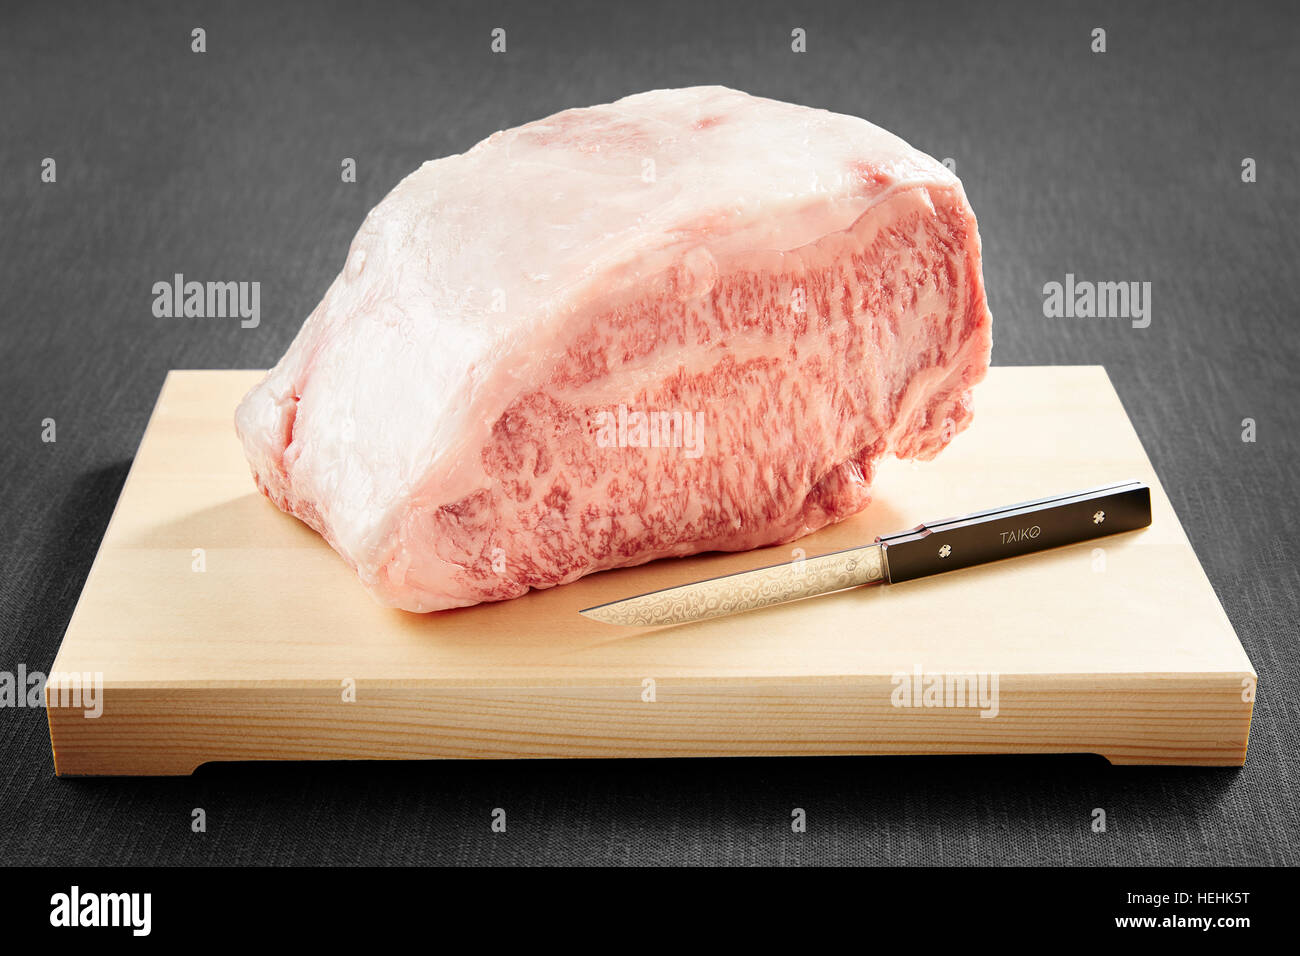 Raw Wagyu beef Japanese delicacy expensive fat marbled meat Stock Photo